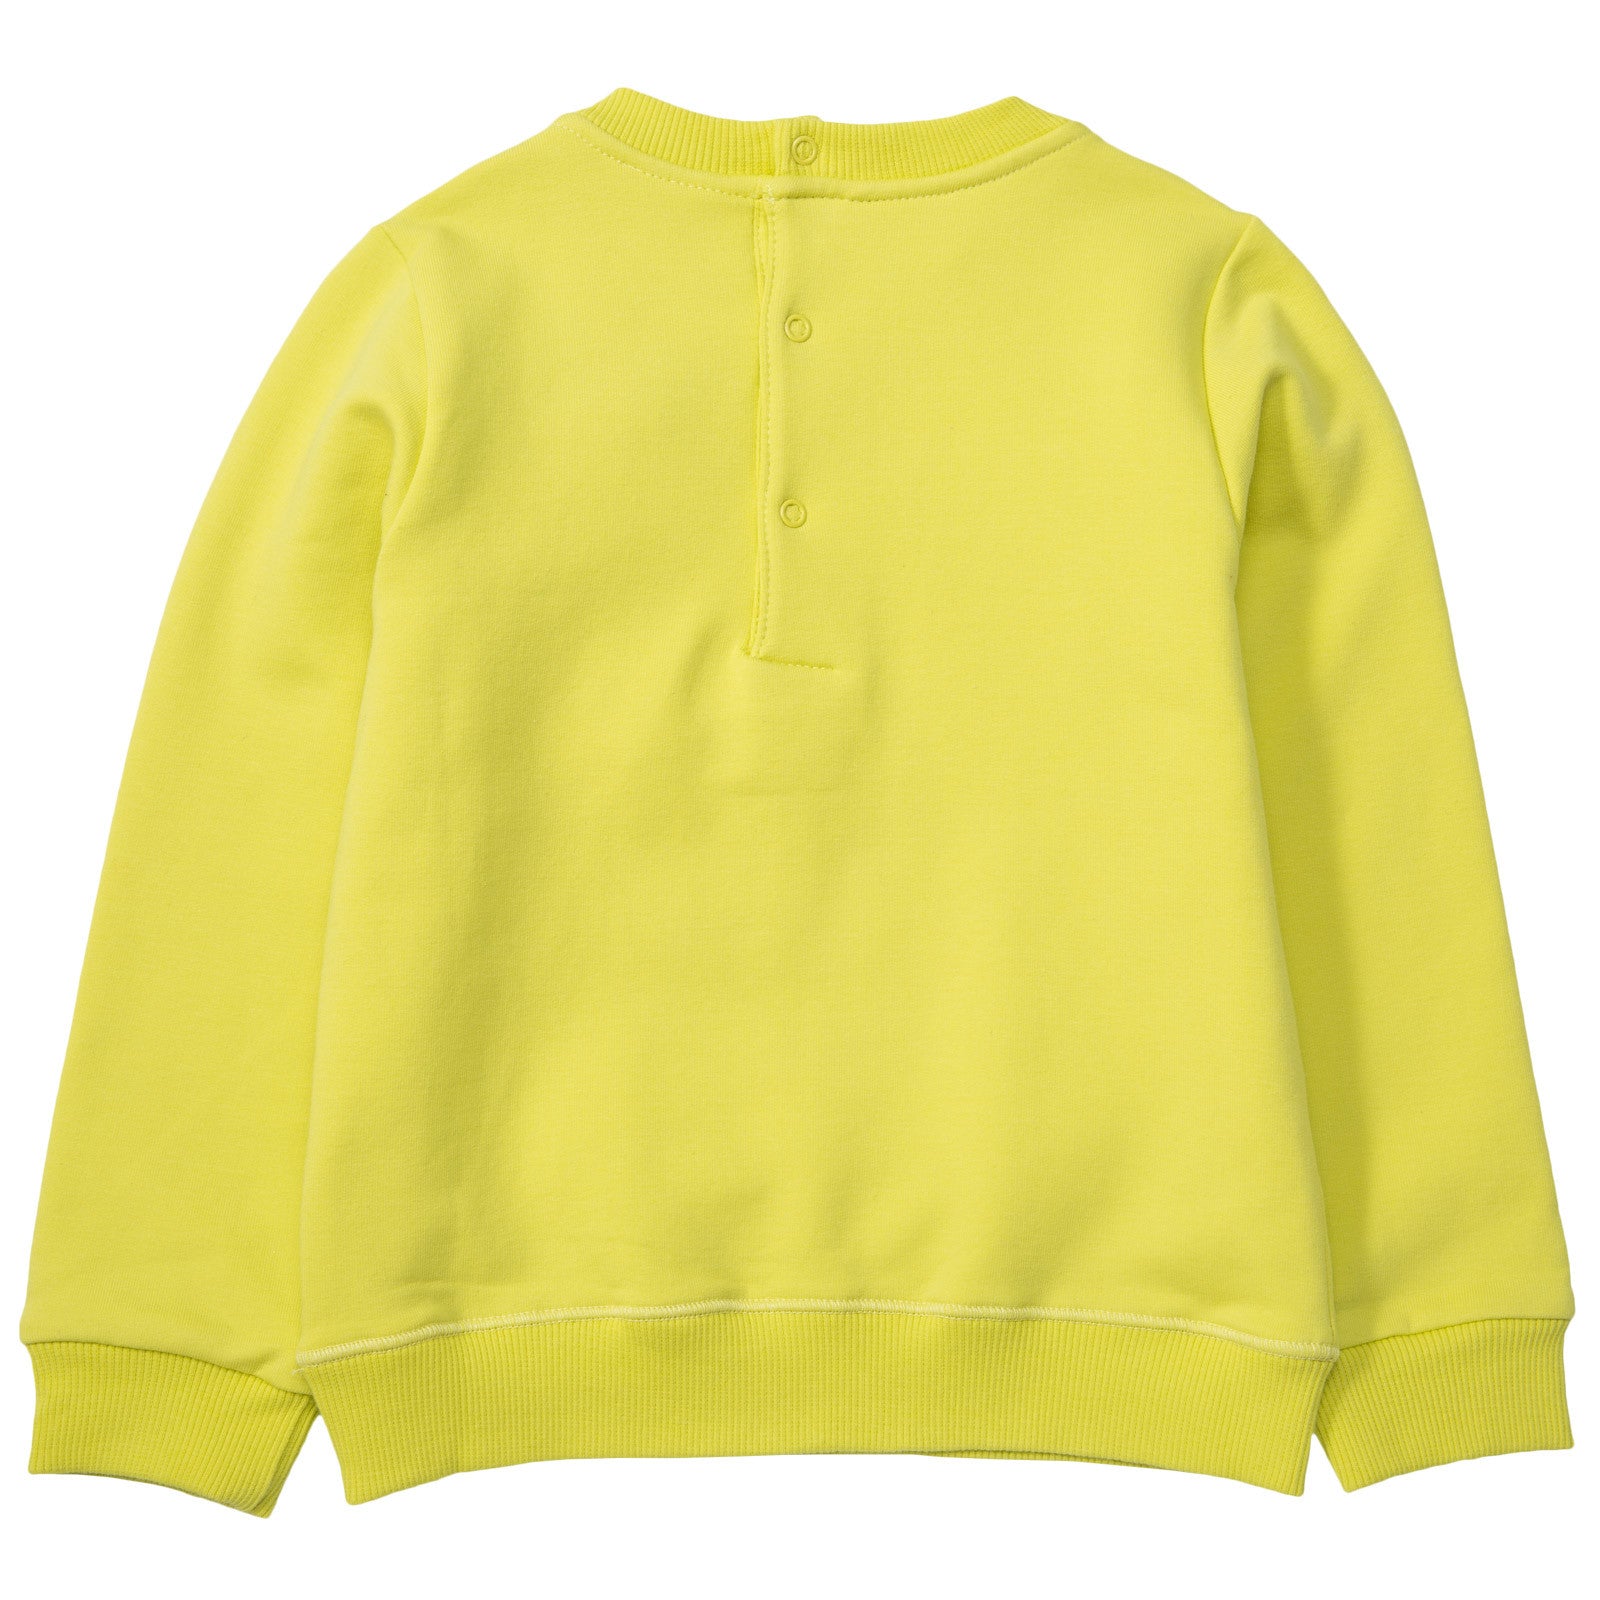 Baby Boys Lime Green Monster Embroidered Sweatshirt - CÉMAROSE | Children's Fashion Store - 2